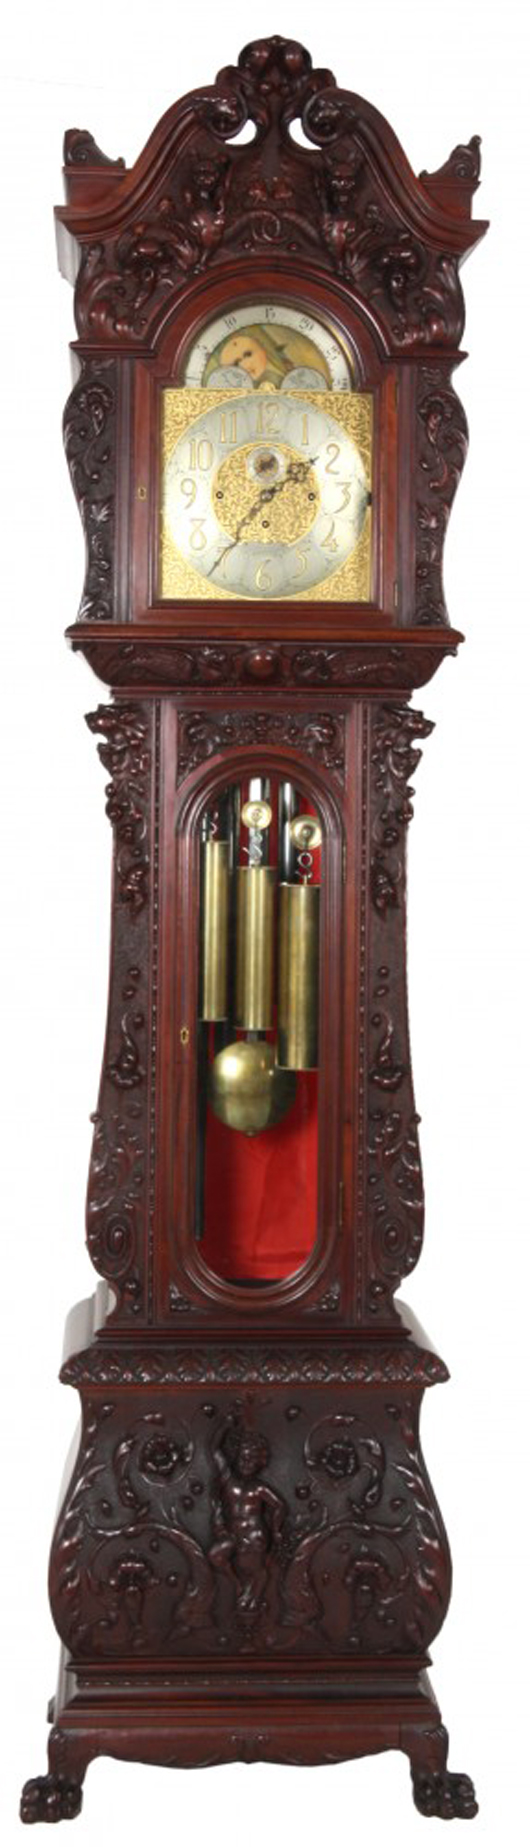 Tiffany & Company mahogany Horner grandfather clock, signed ‘Walter H. Durfee.’ Price realized: $23,600. Fontaine’s Auction Gallery image.